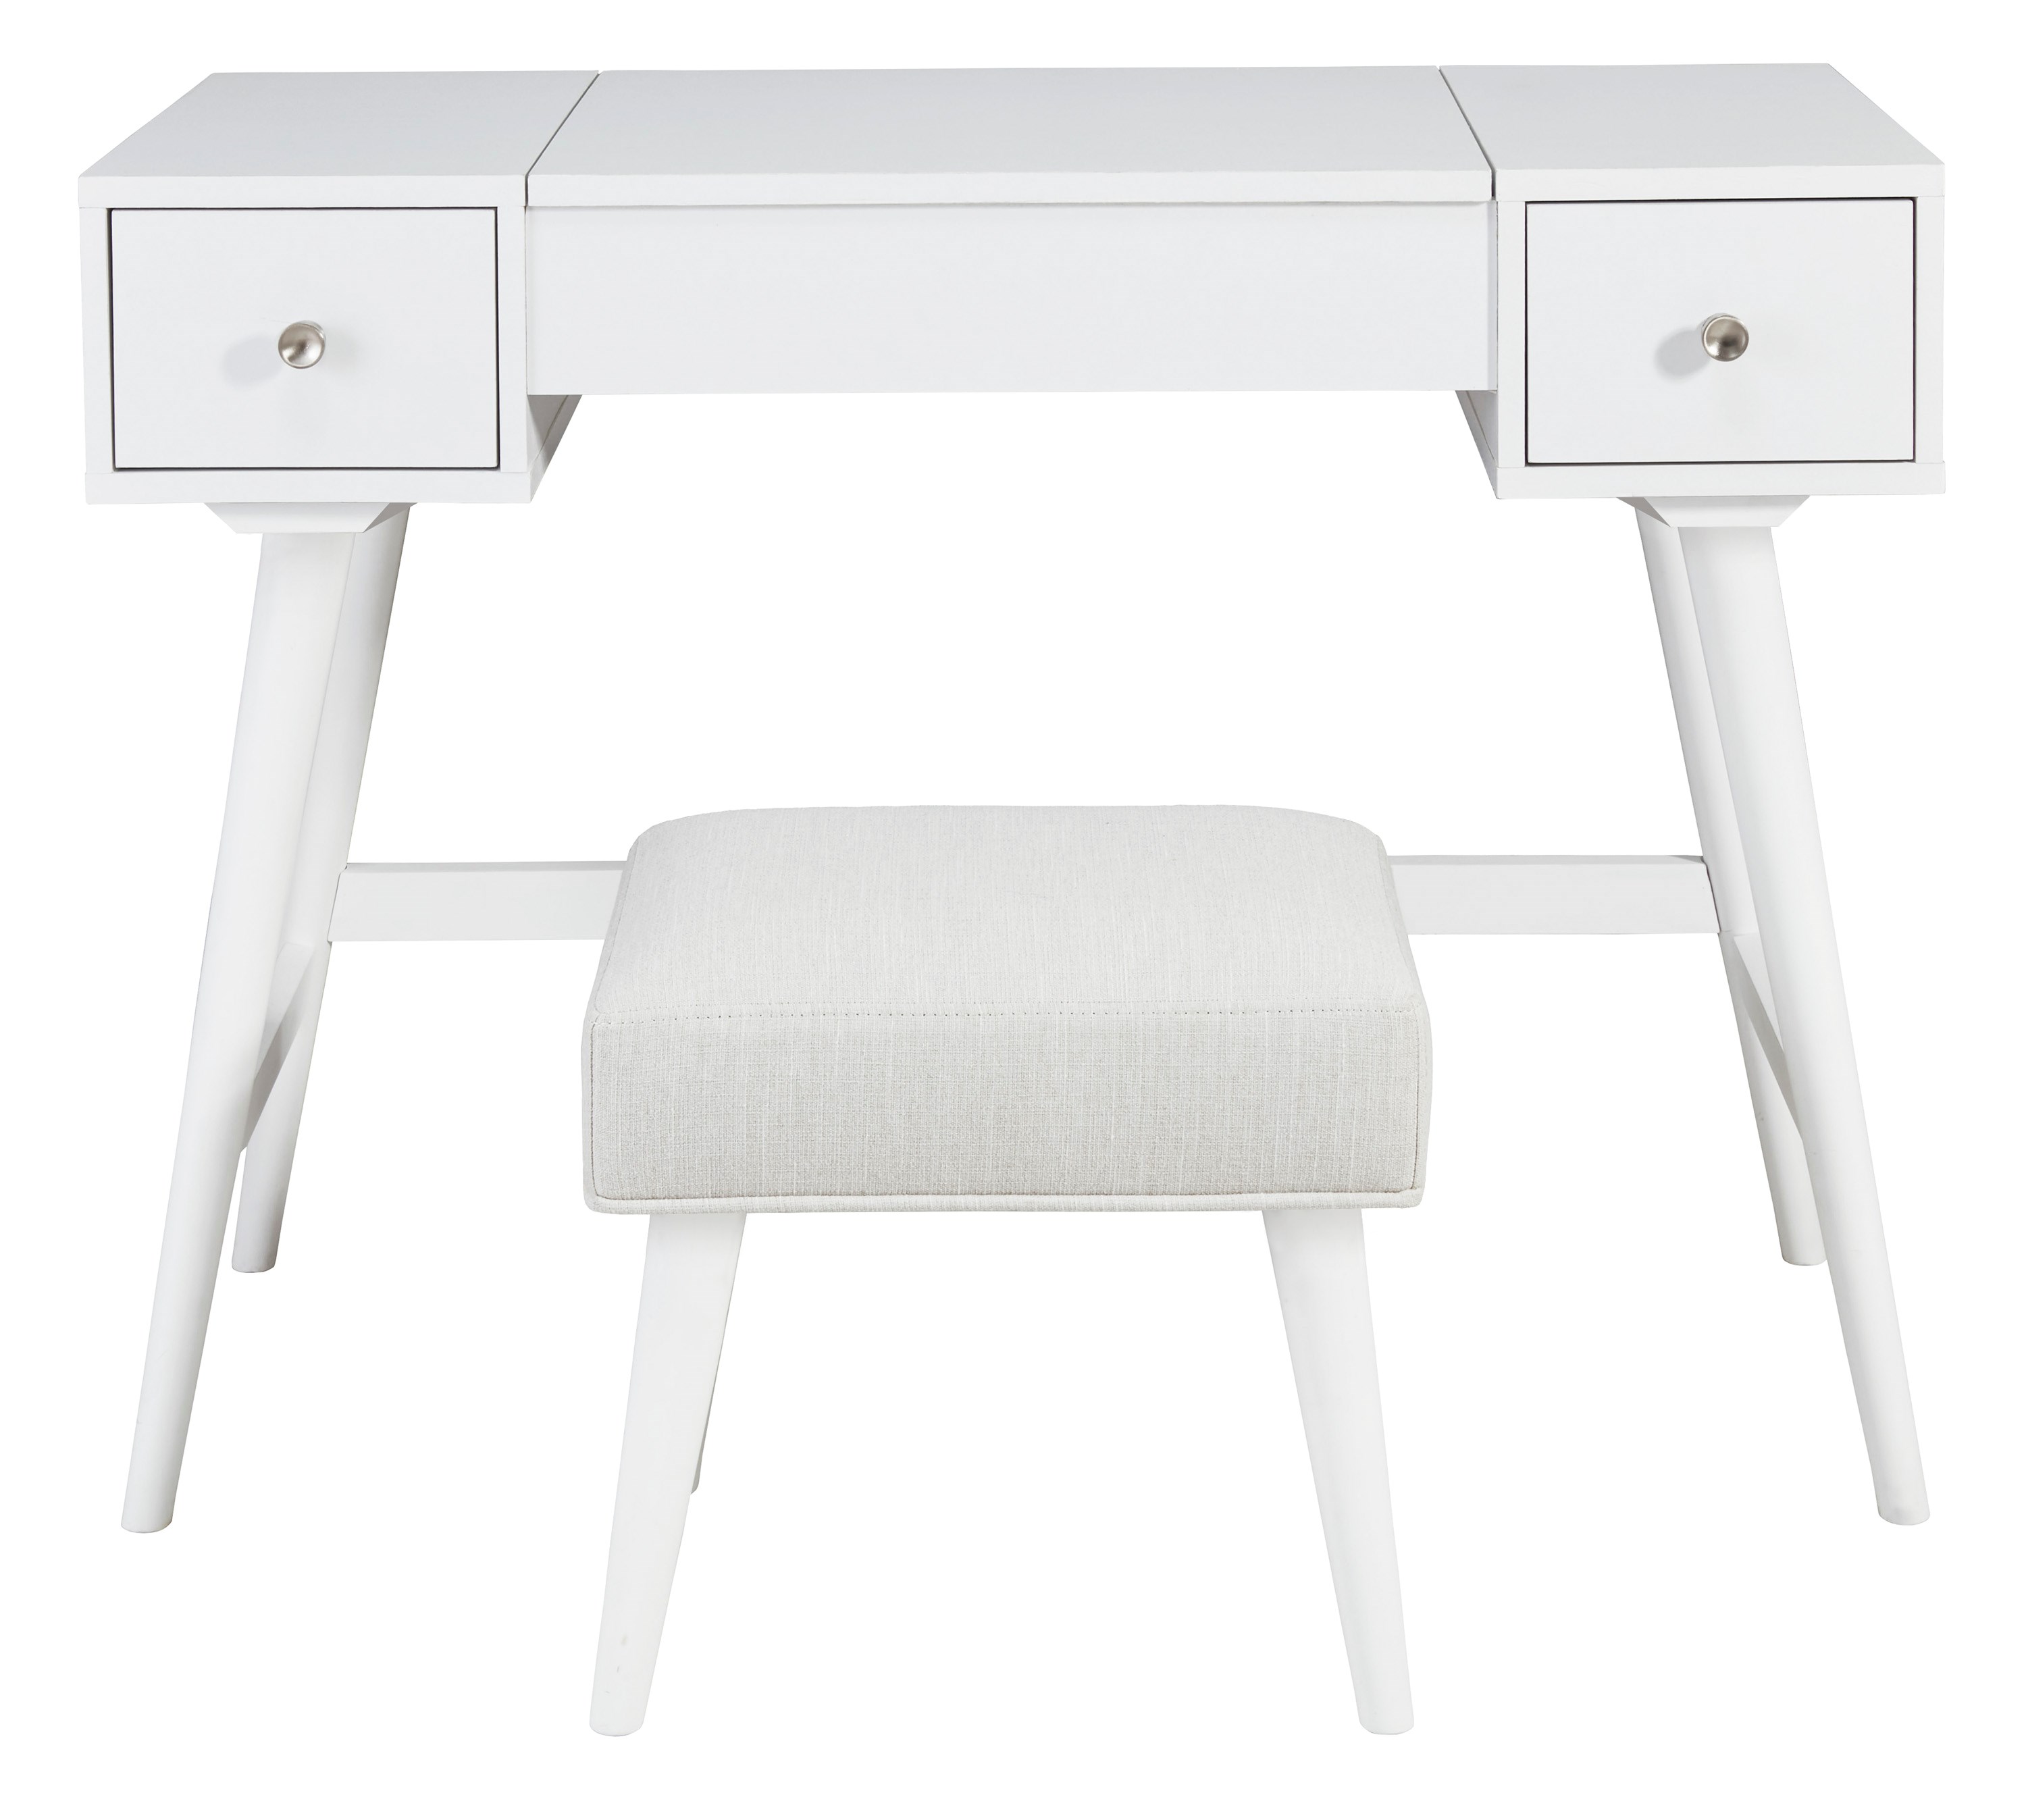 Signature Design by Ashley Thadamere 576330600 White Vanity with 